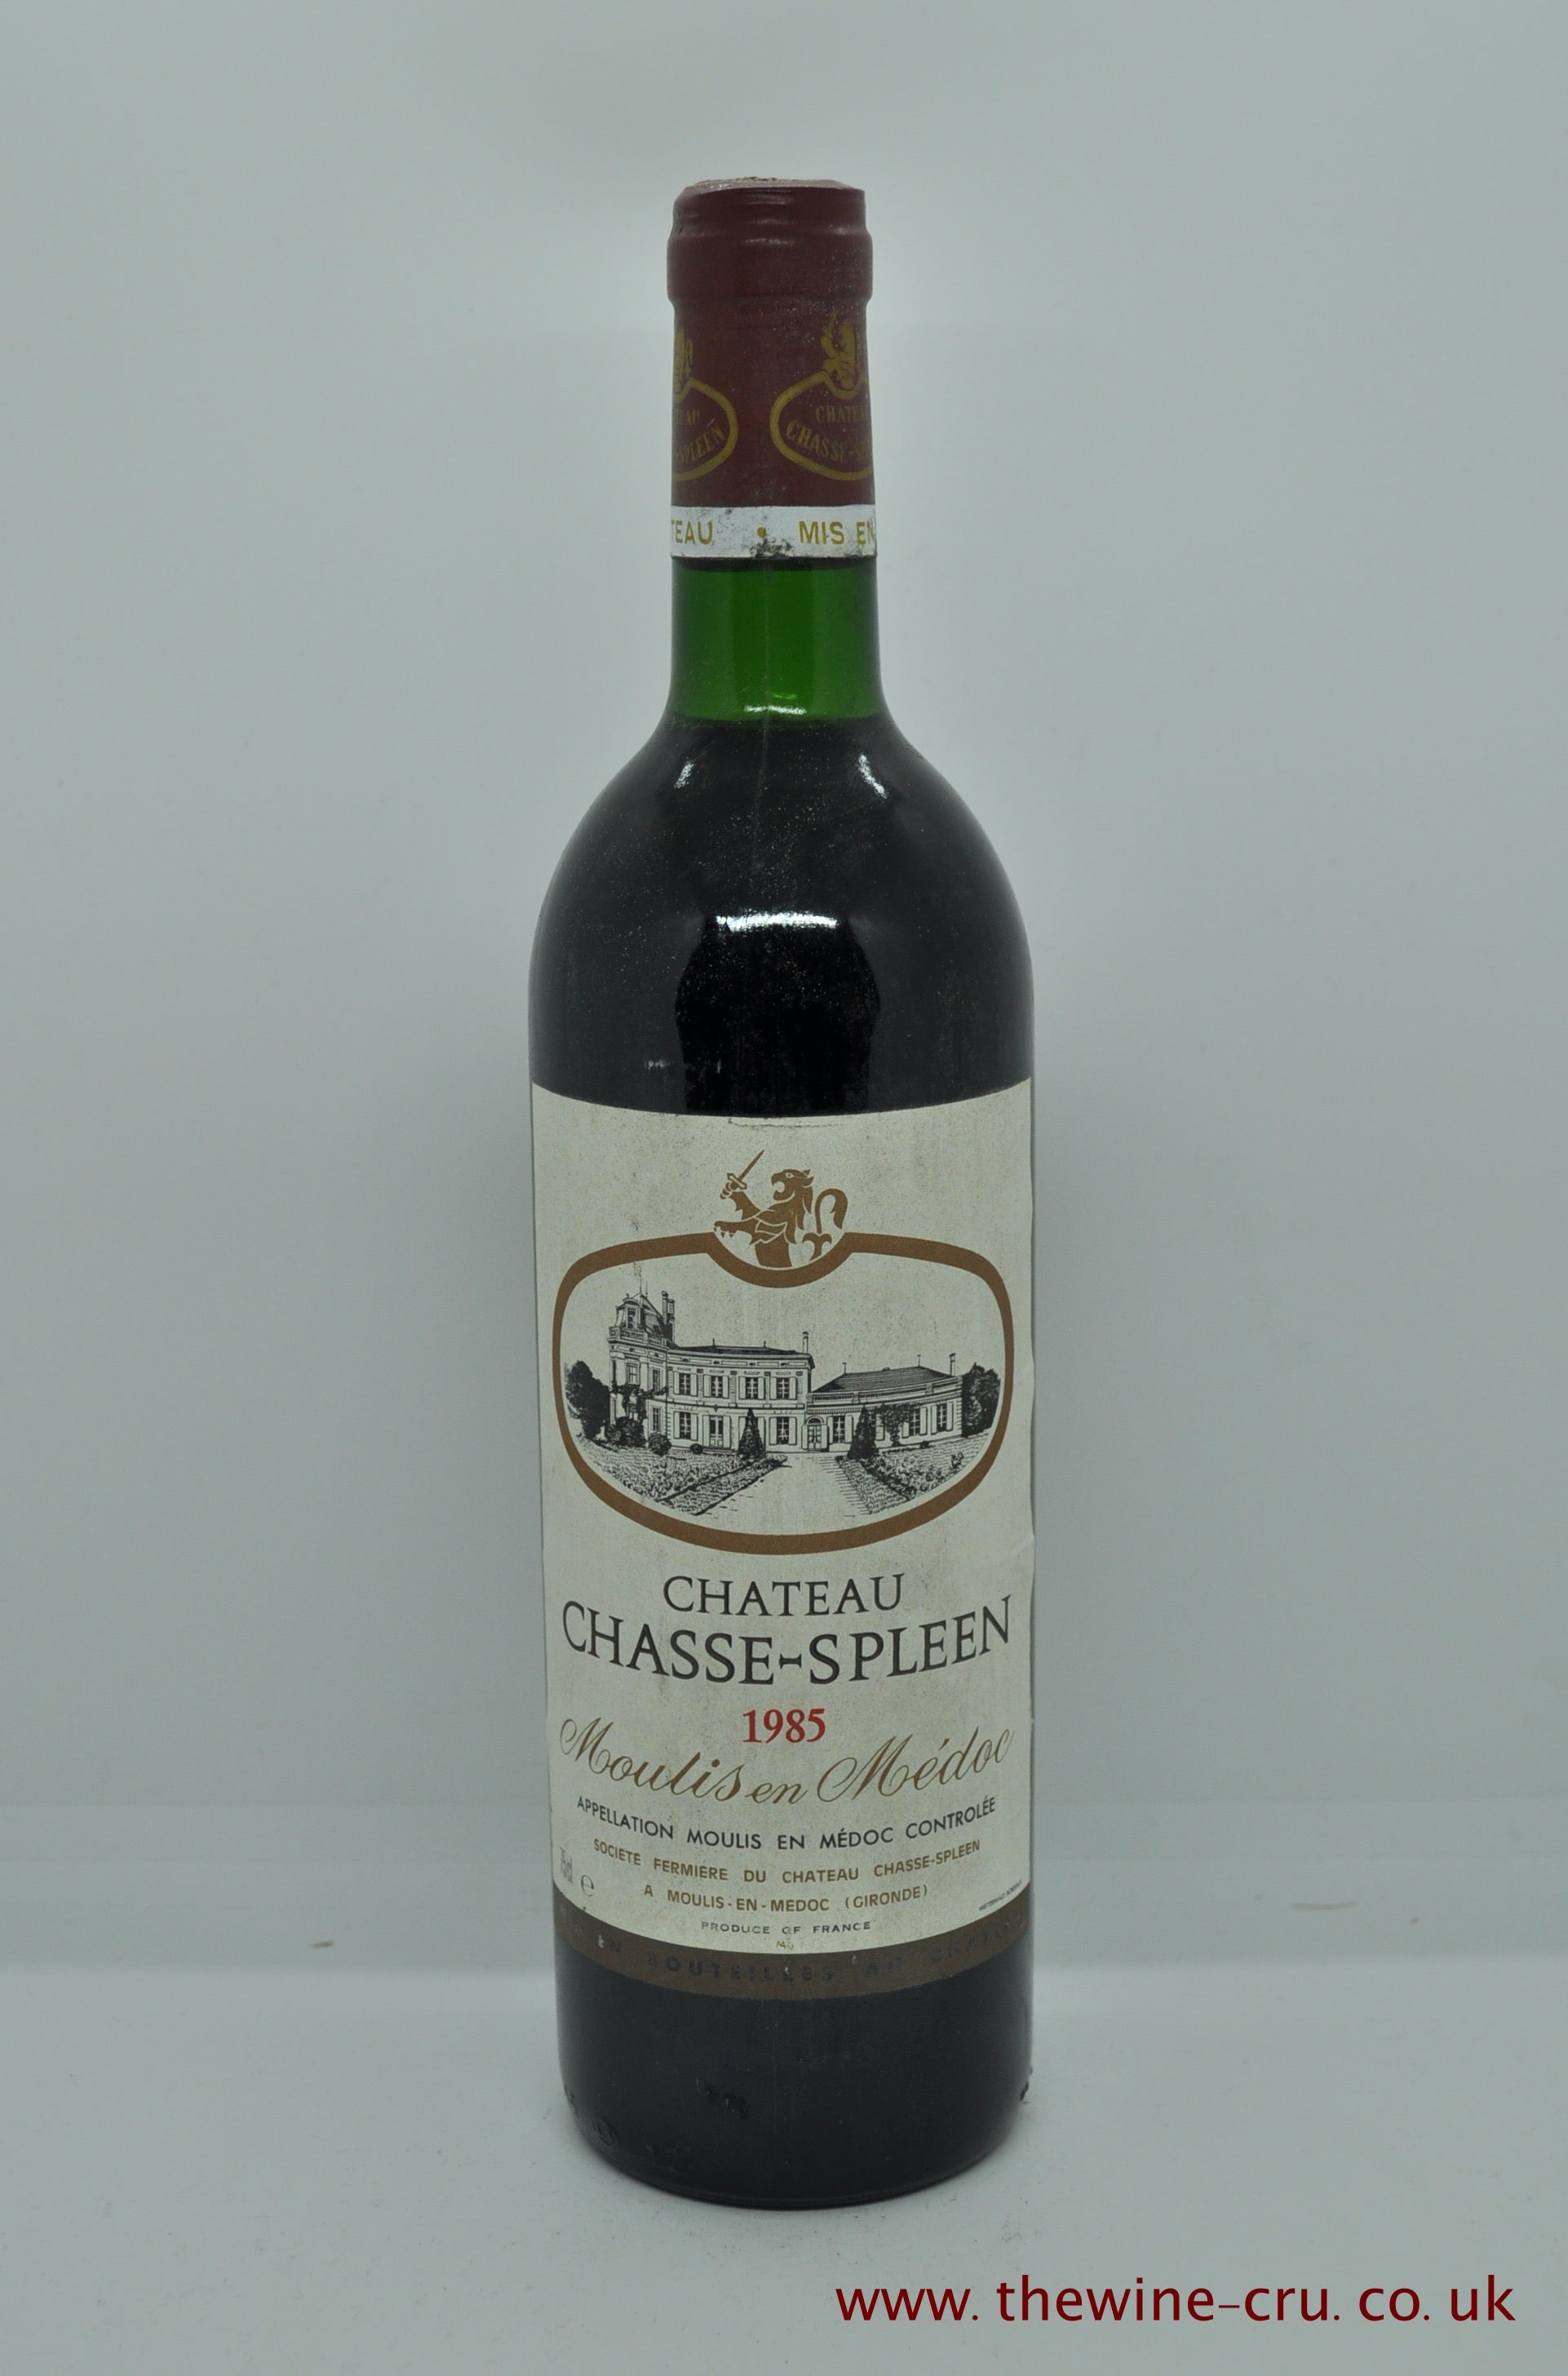 1985 vintage red wine. Chateau Classe-Spleen France Bordeaux. The bottle is in good condition with the wine level being base of neck. Immediate delivery. Free local delivery. Gift wrapping available.